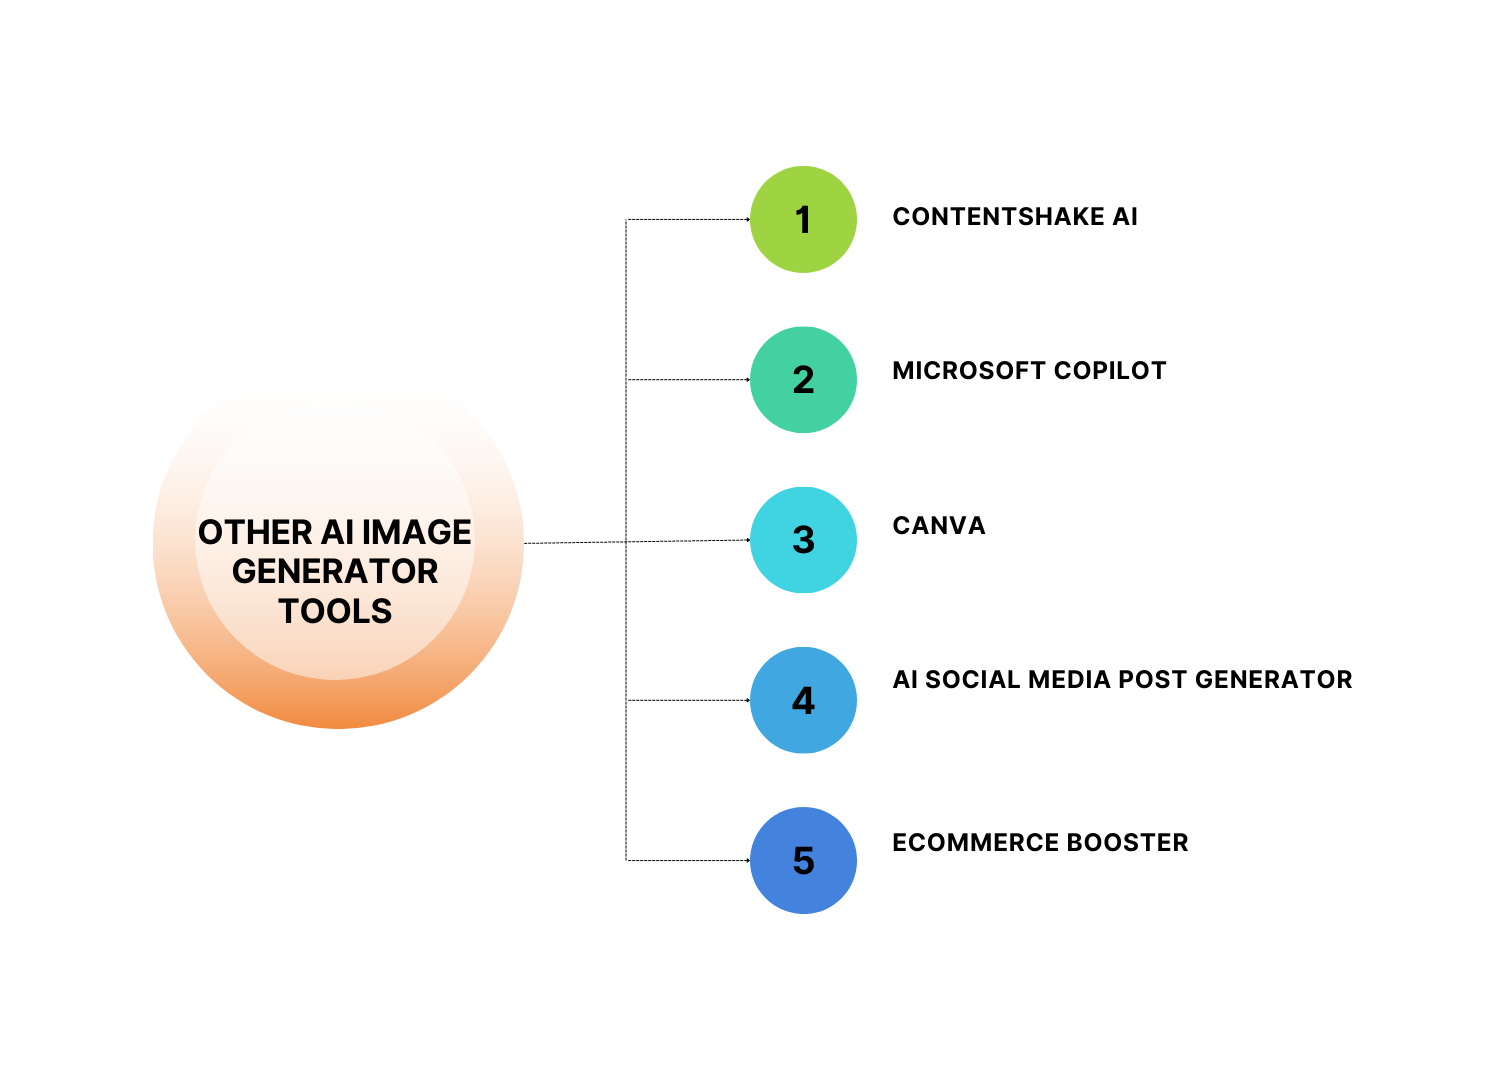 Other AI tools for image generation